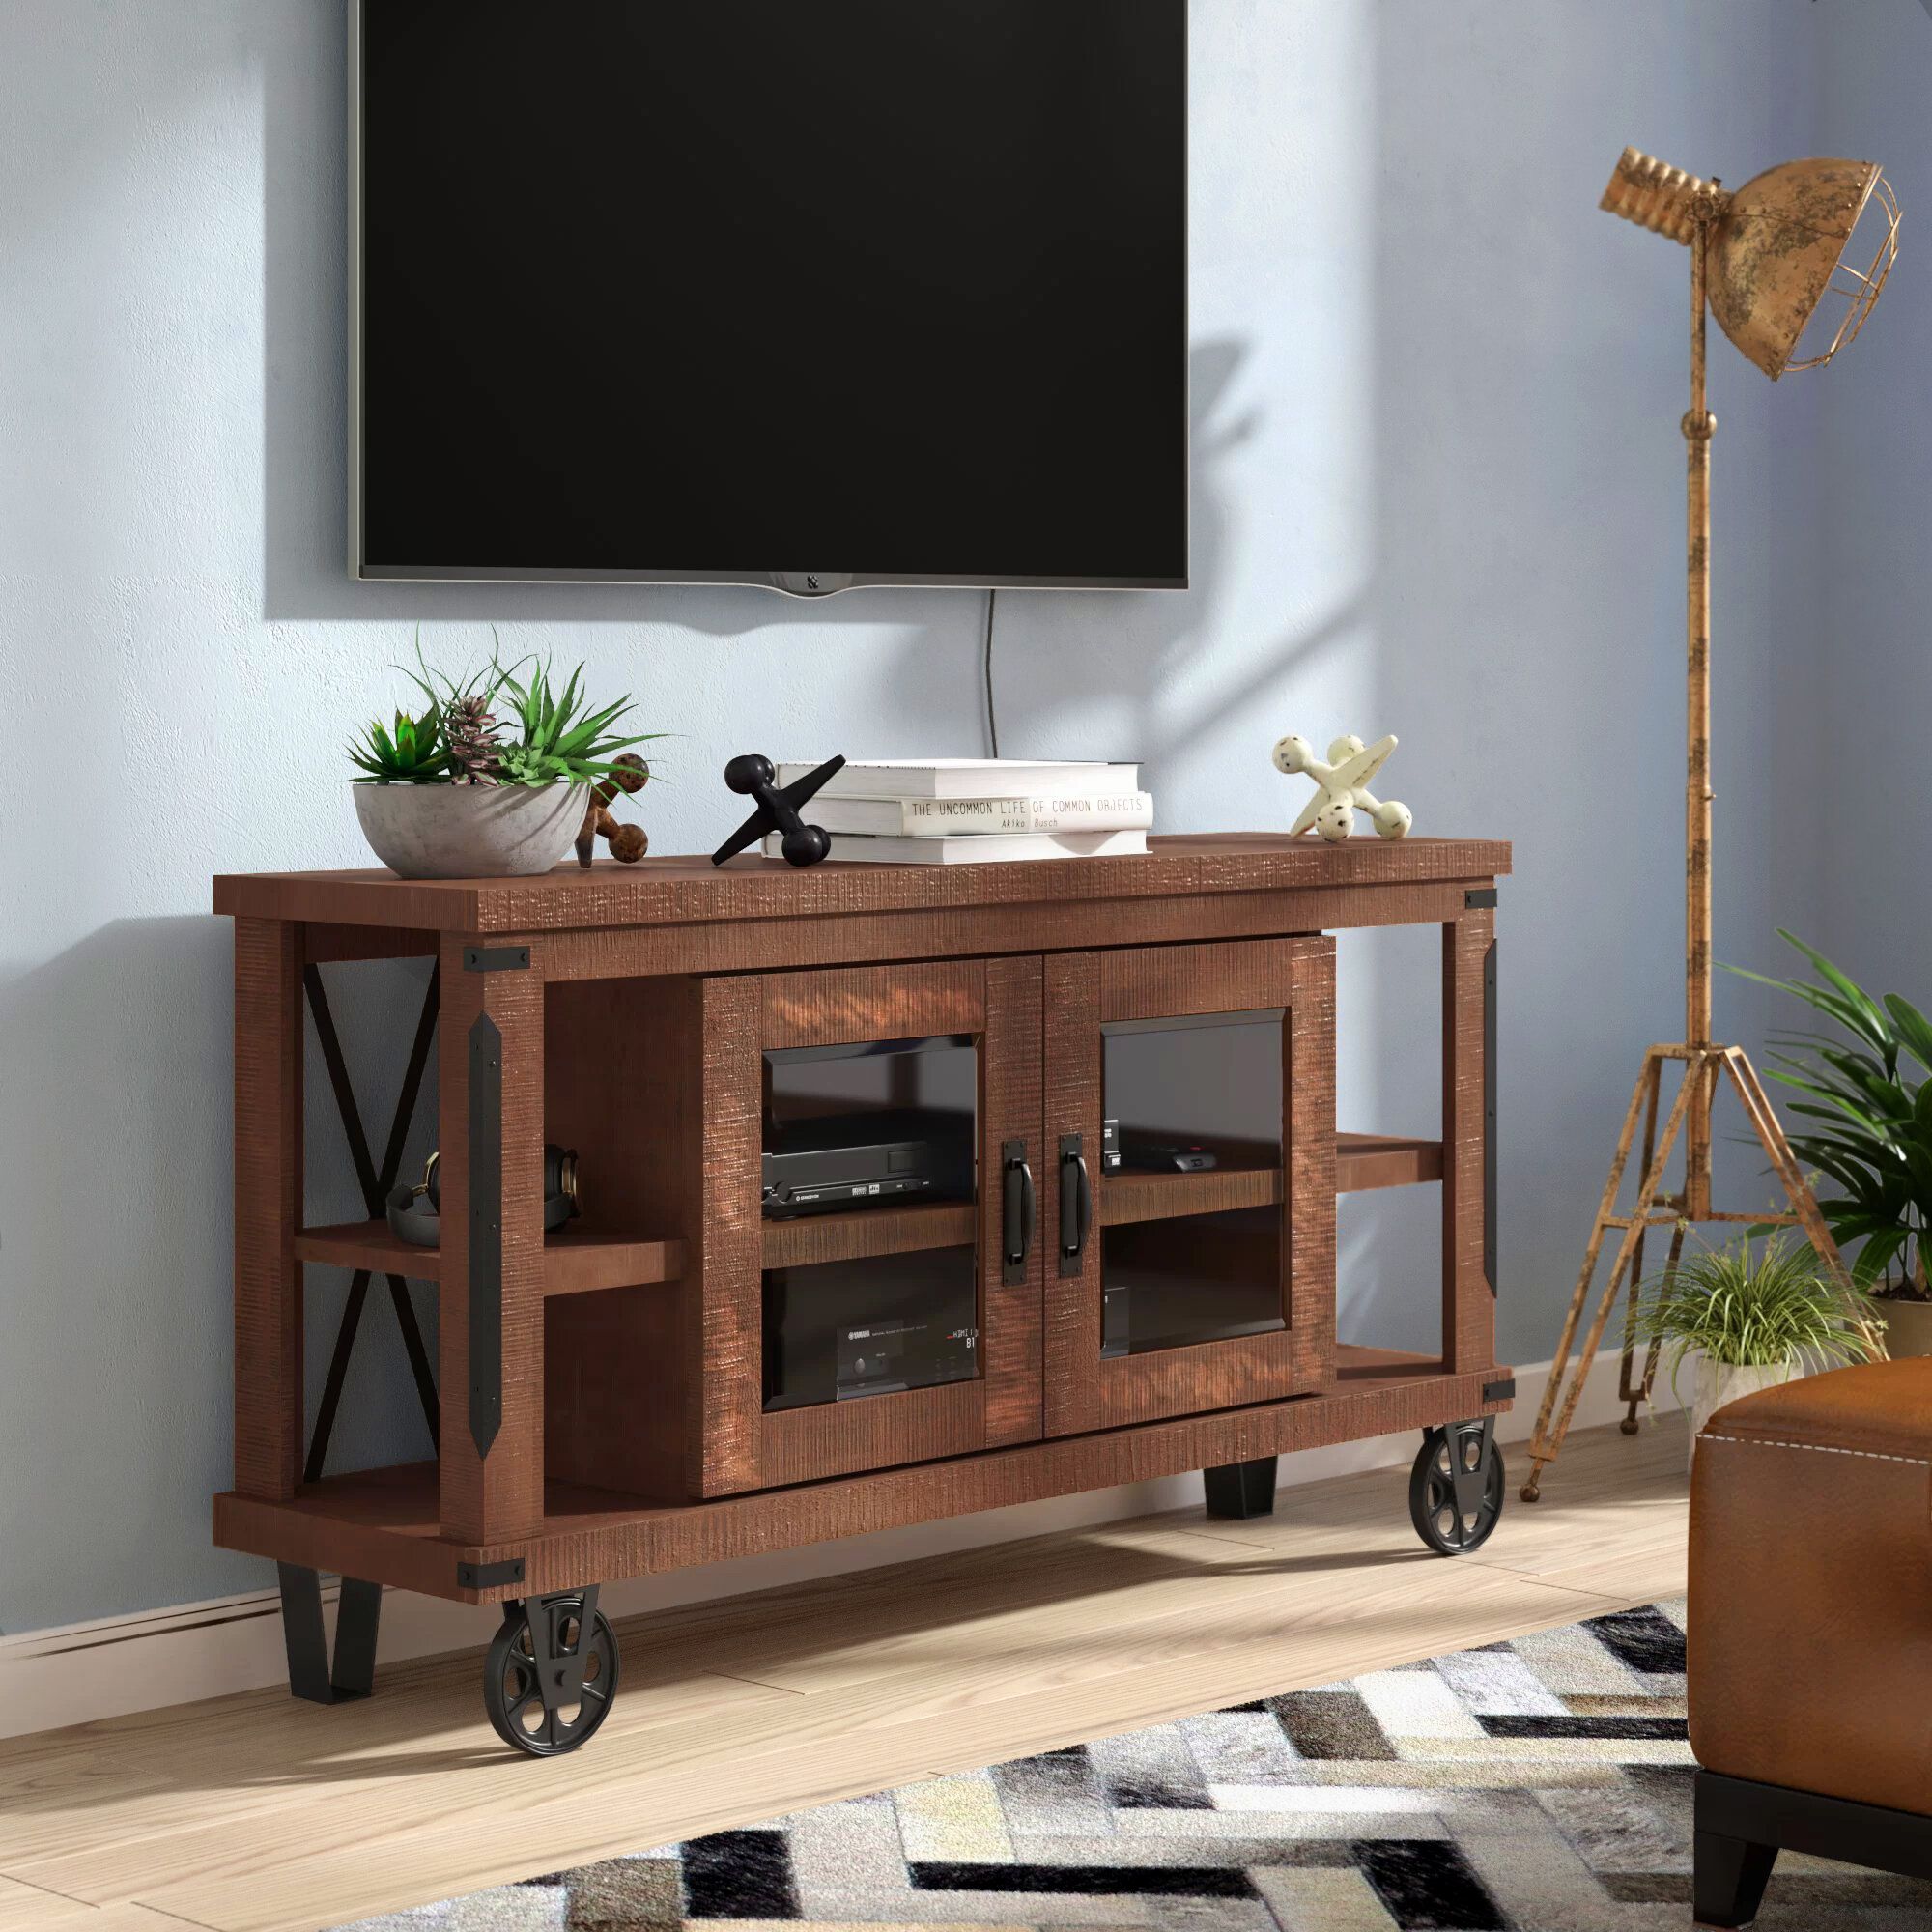 Tv Stand Casters Wheels – Tavr Moblile Floor Tv Stand Cart With Audio Regarding Modern Rolling Tv Stands (Gallery 10 of 20)